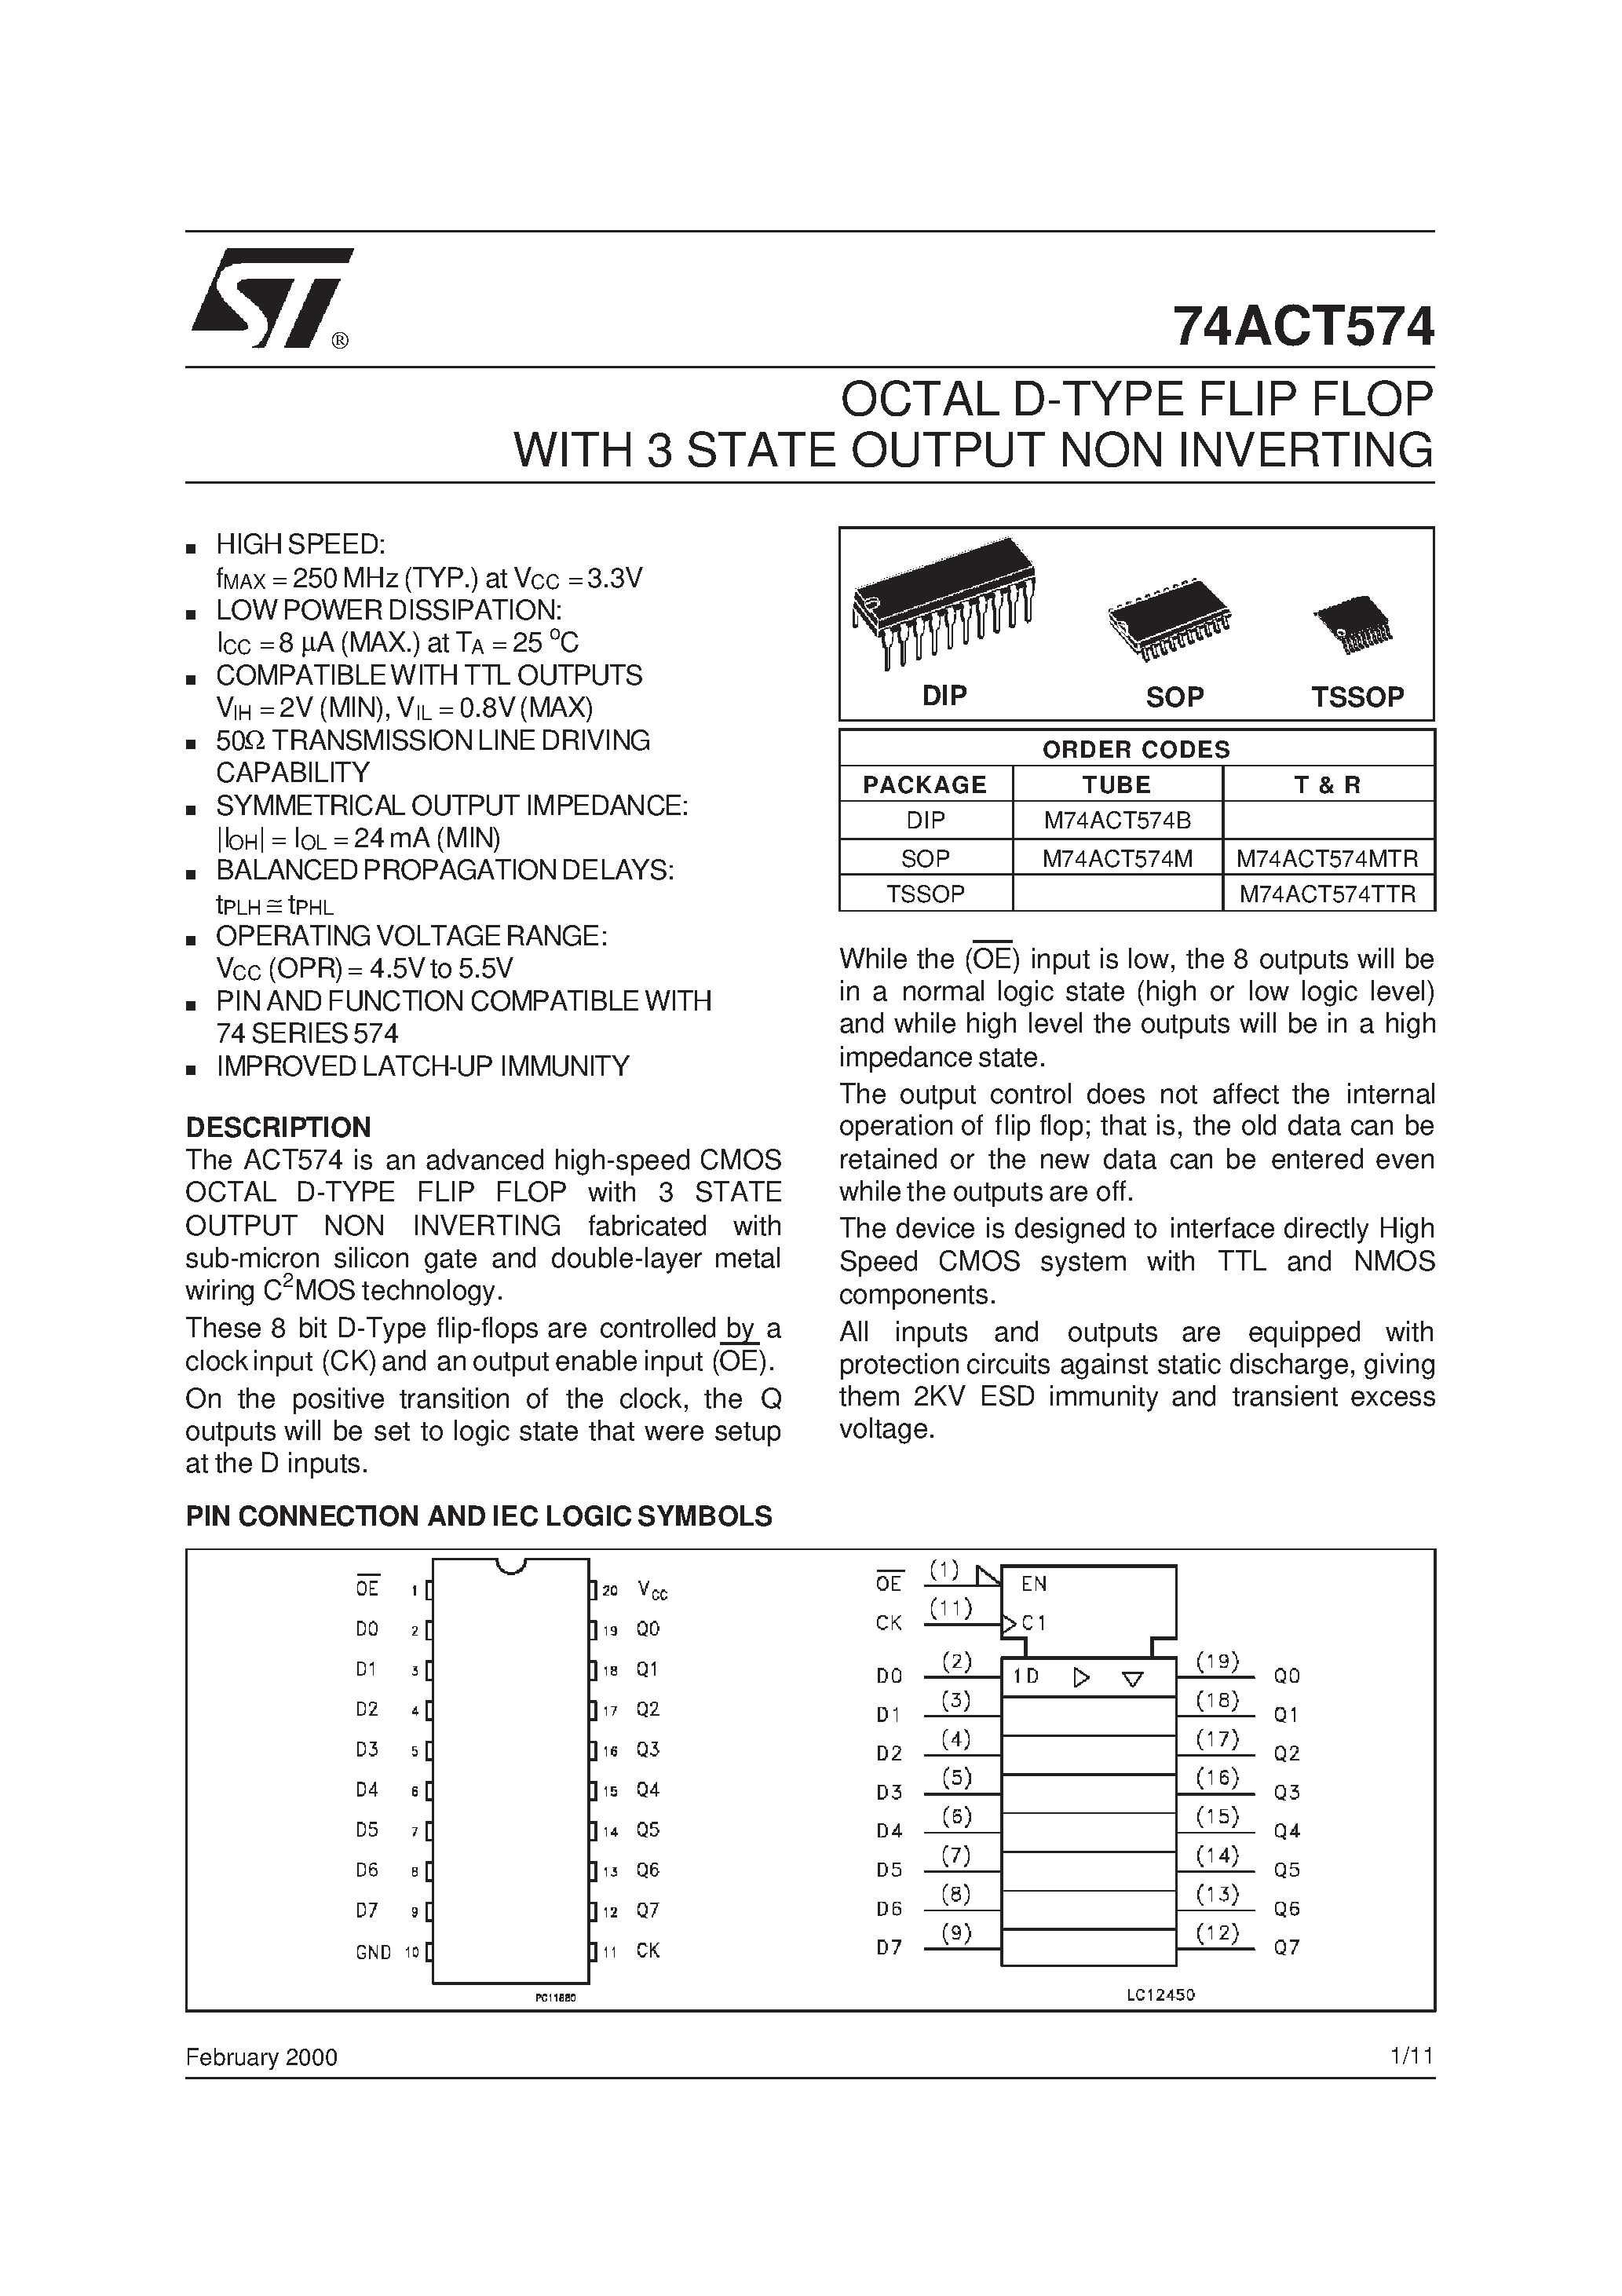 Datasheet M74ACT574M - OCTAL D-TYPE FLIP FLOP WITH 3 STATE OUTPUT NON INVERTING page 1